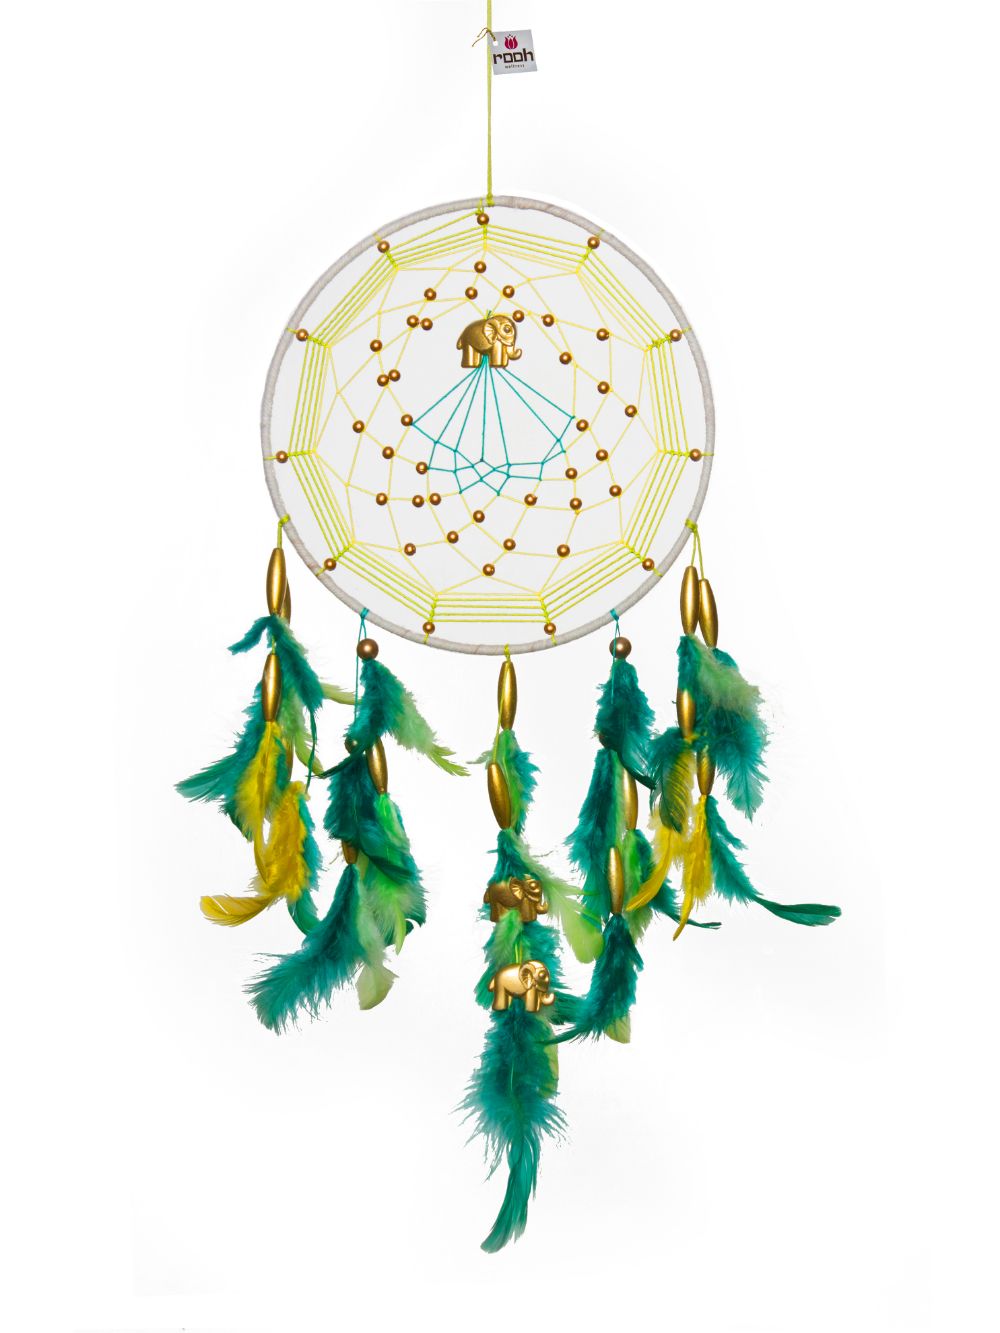 Green & Yellow with Gold Elephants Dream Catcher